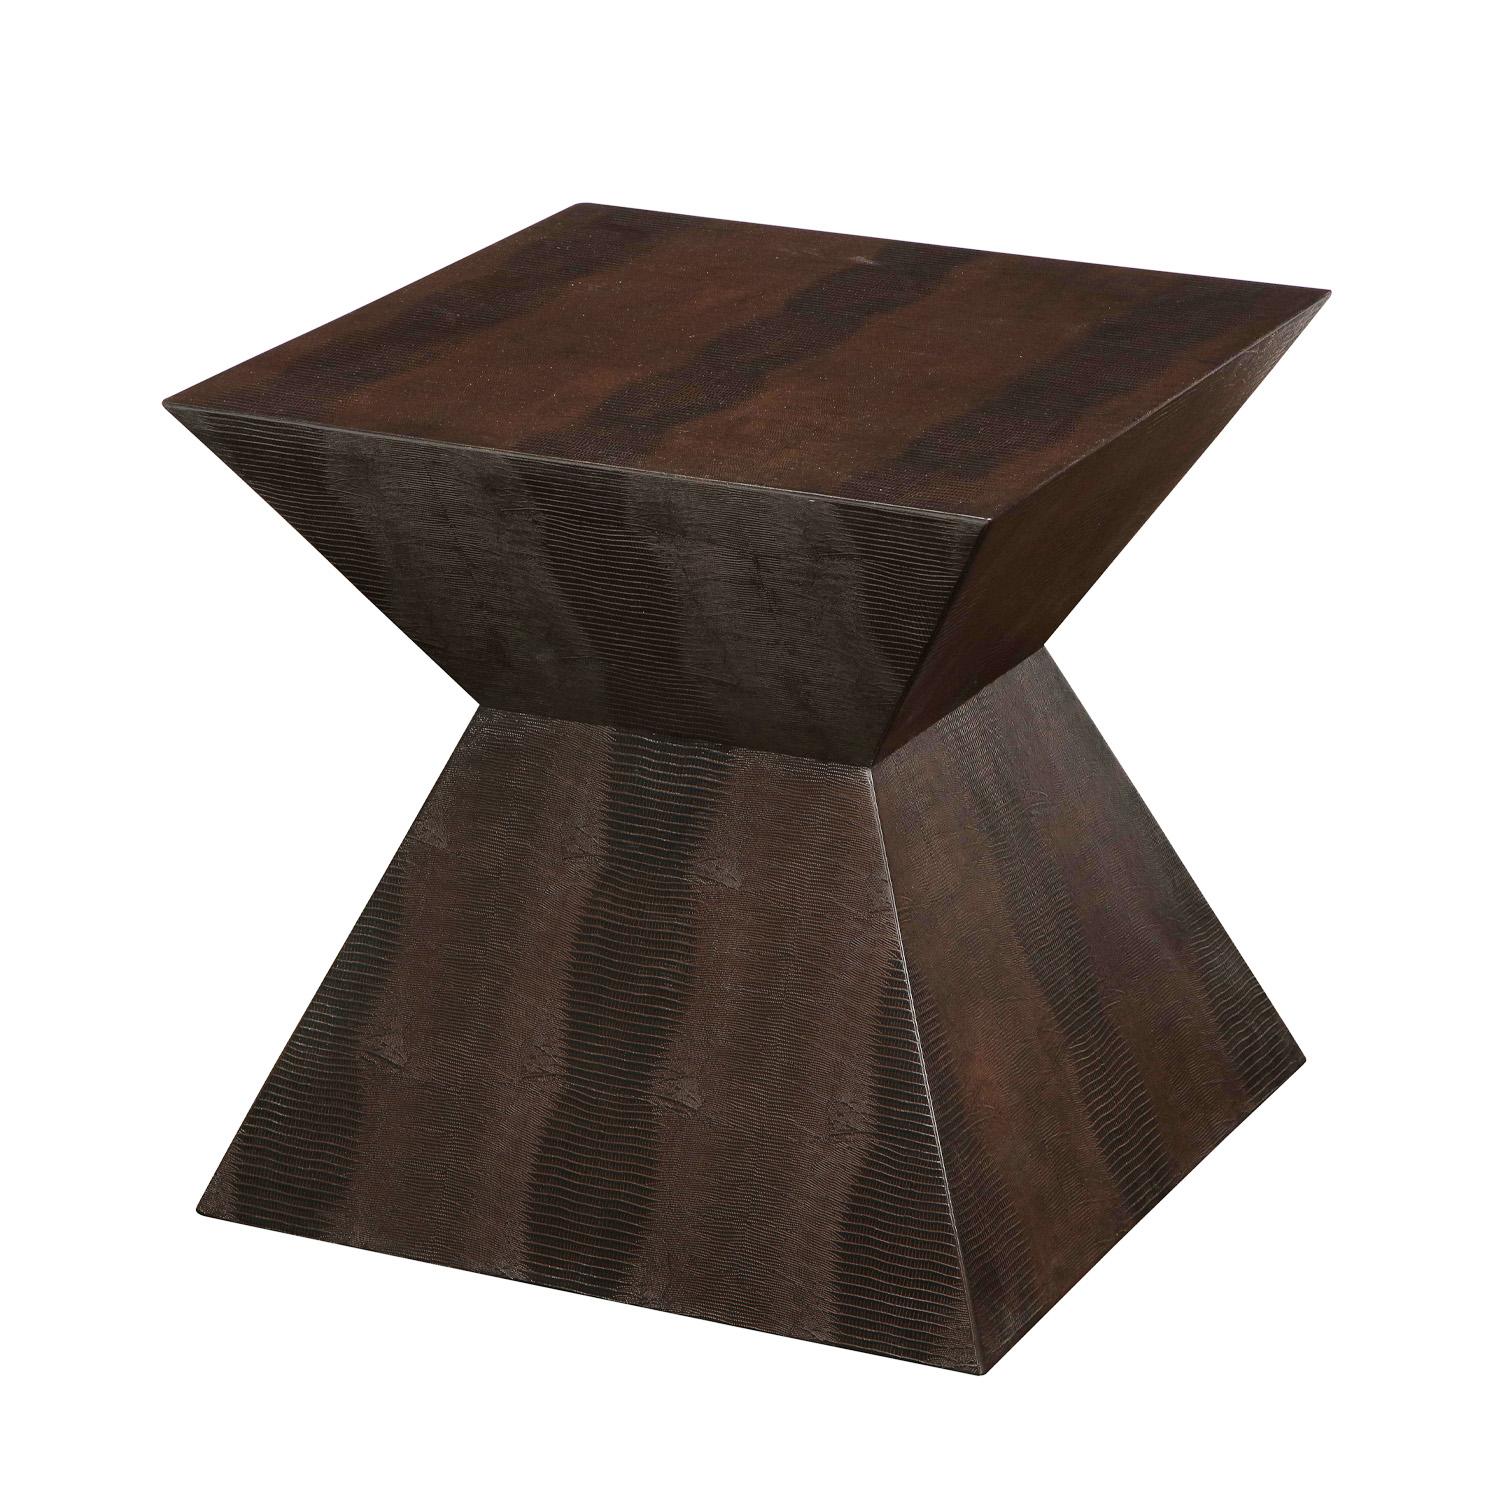 Striking sculptural side table in brown embossed lizard leather by Karl Springer, American 1980's. This table is completely finished, even the bottom. Karl Springer was a meticulous designer and only used the meticulous craftsmen.